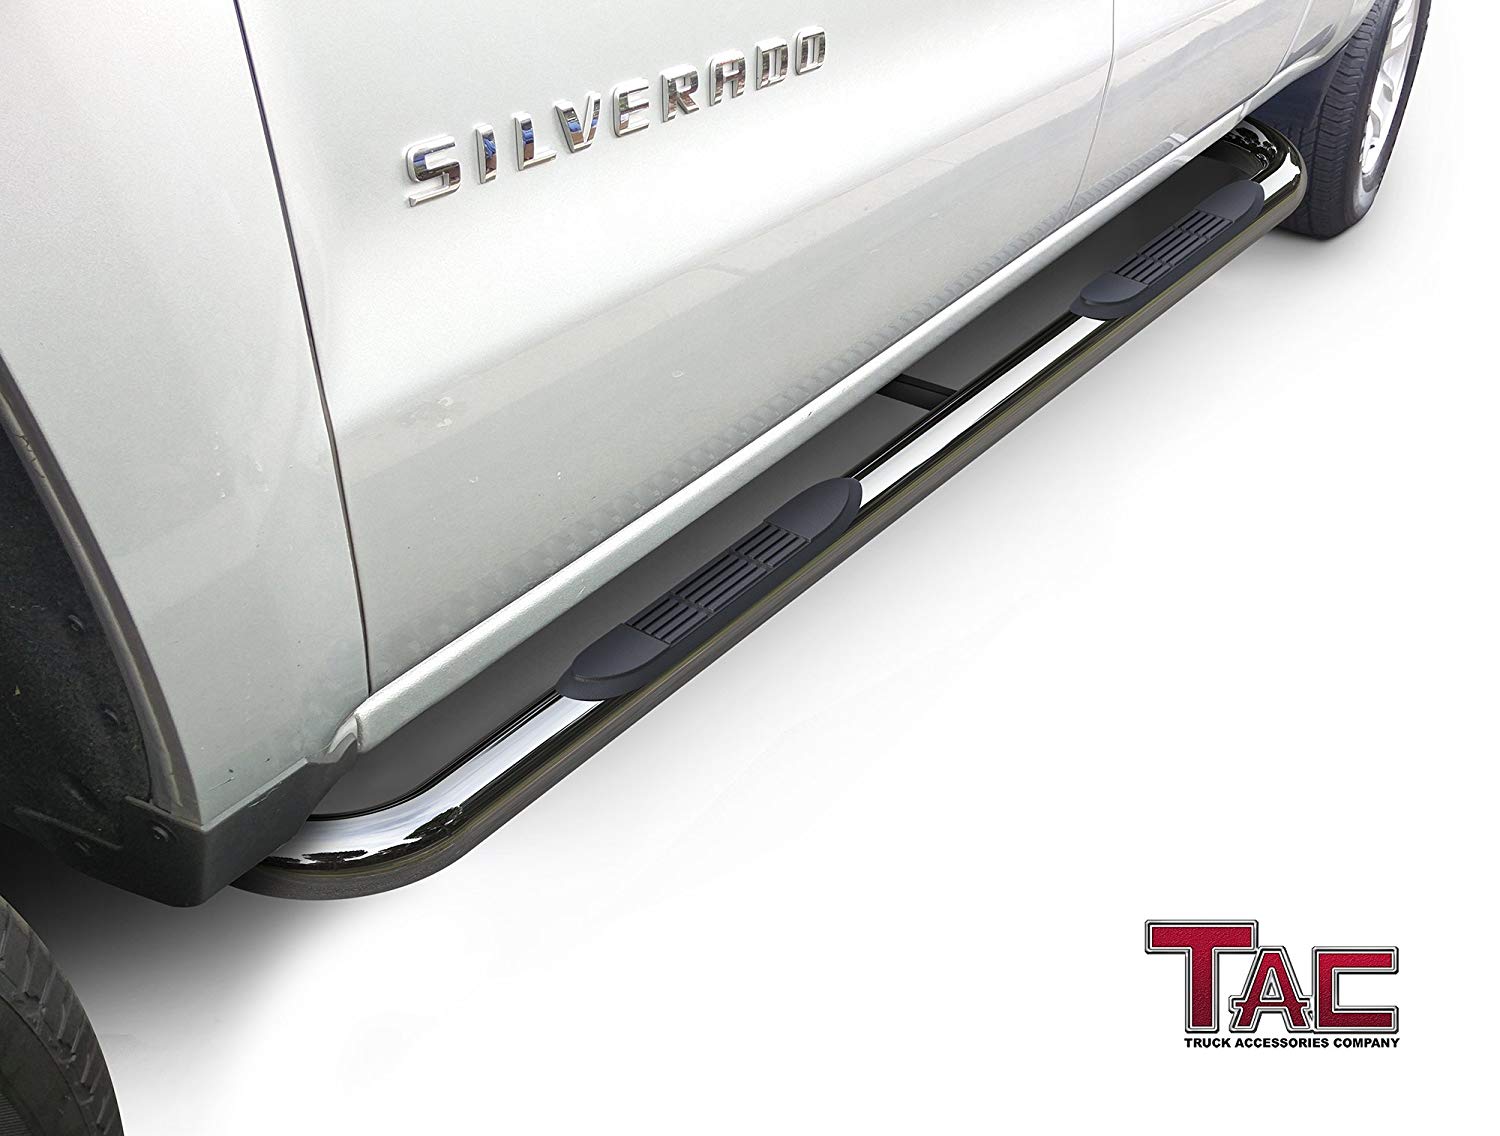 TAC Stainless Steel 3 Side Steps For 2001-2018 Chevy Silverado/GMC Si |  TACUSA